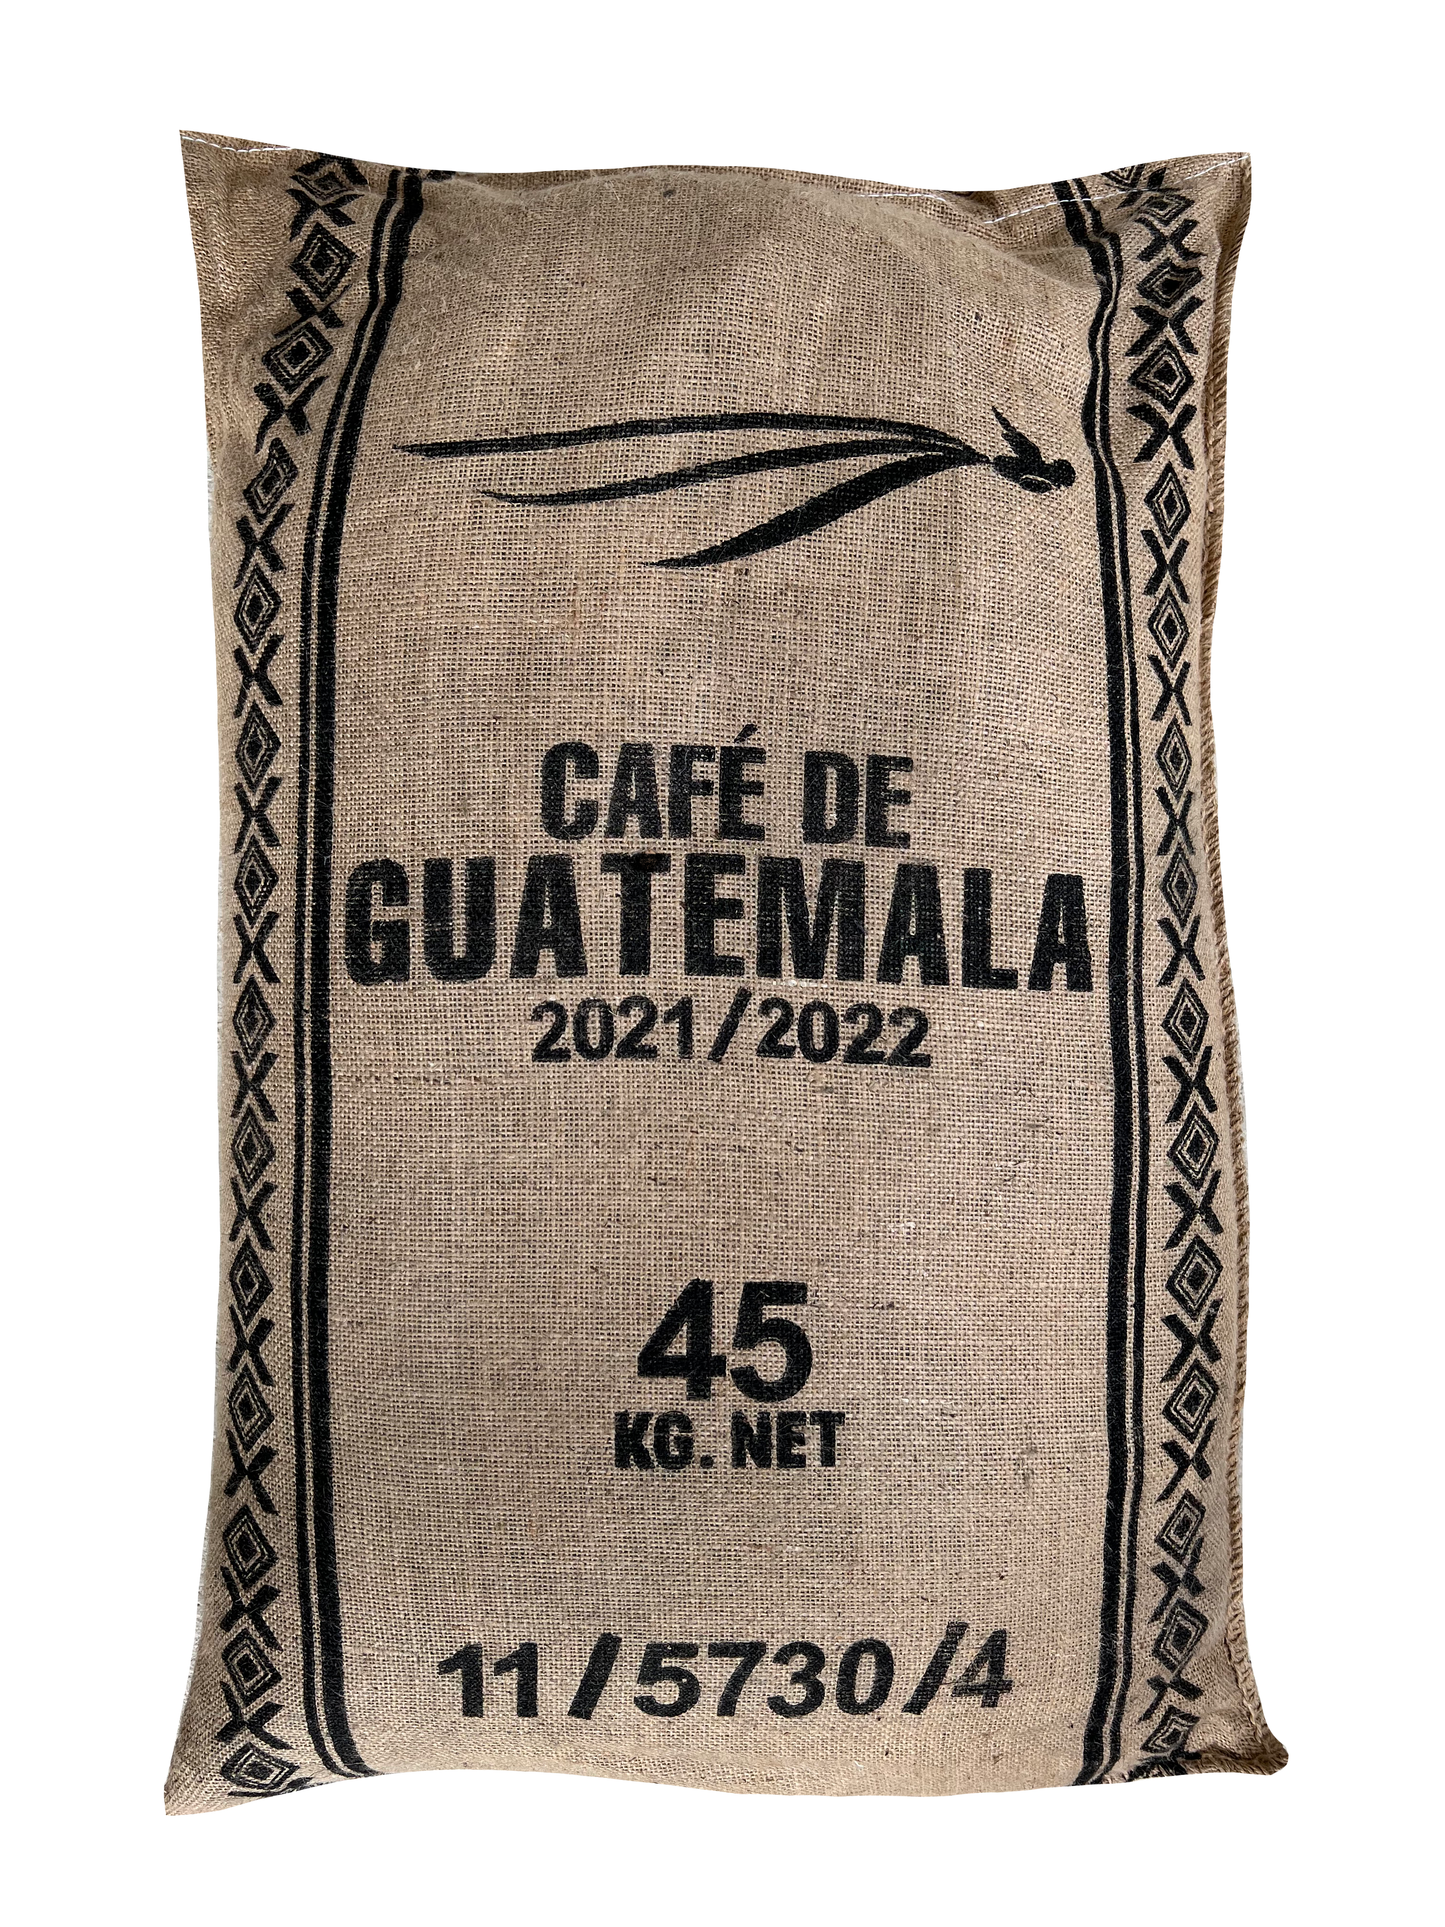 Guatemala HB Specialty Green unroasted arabica coffee beans – Kafetos